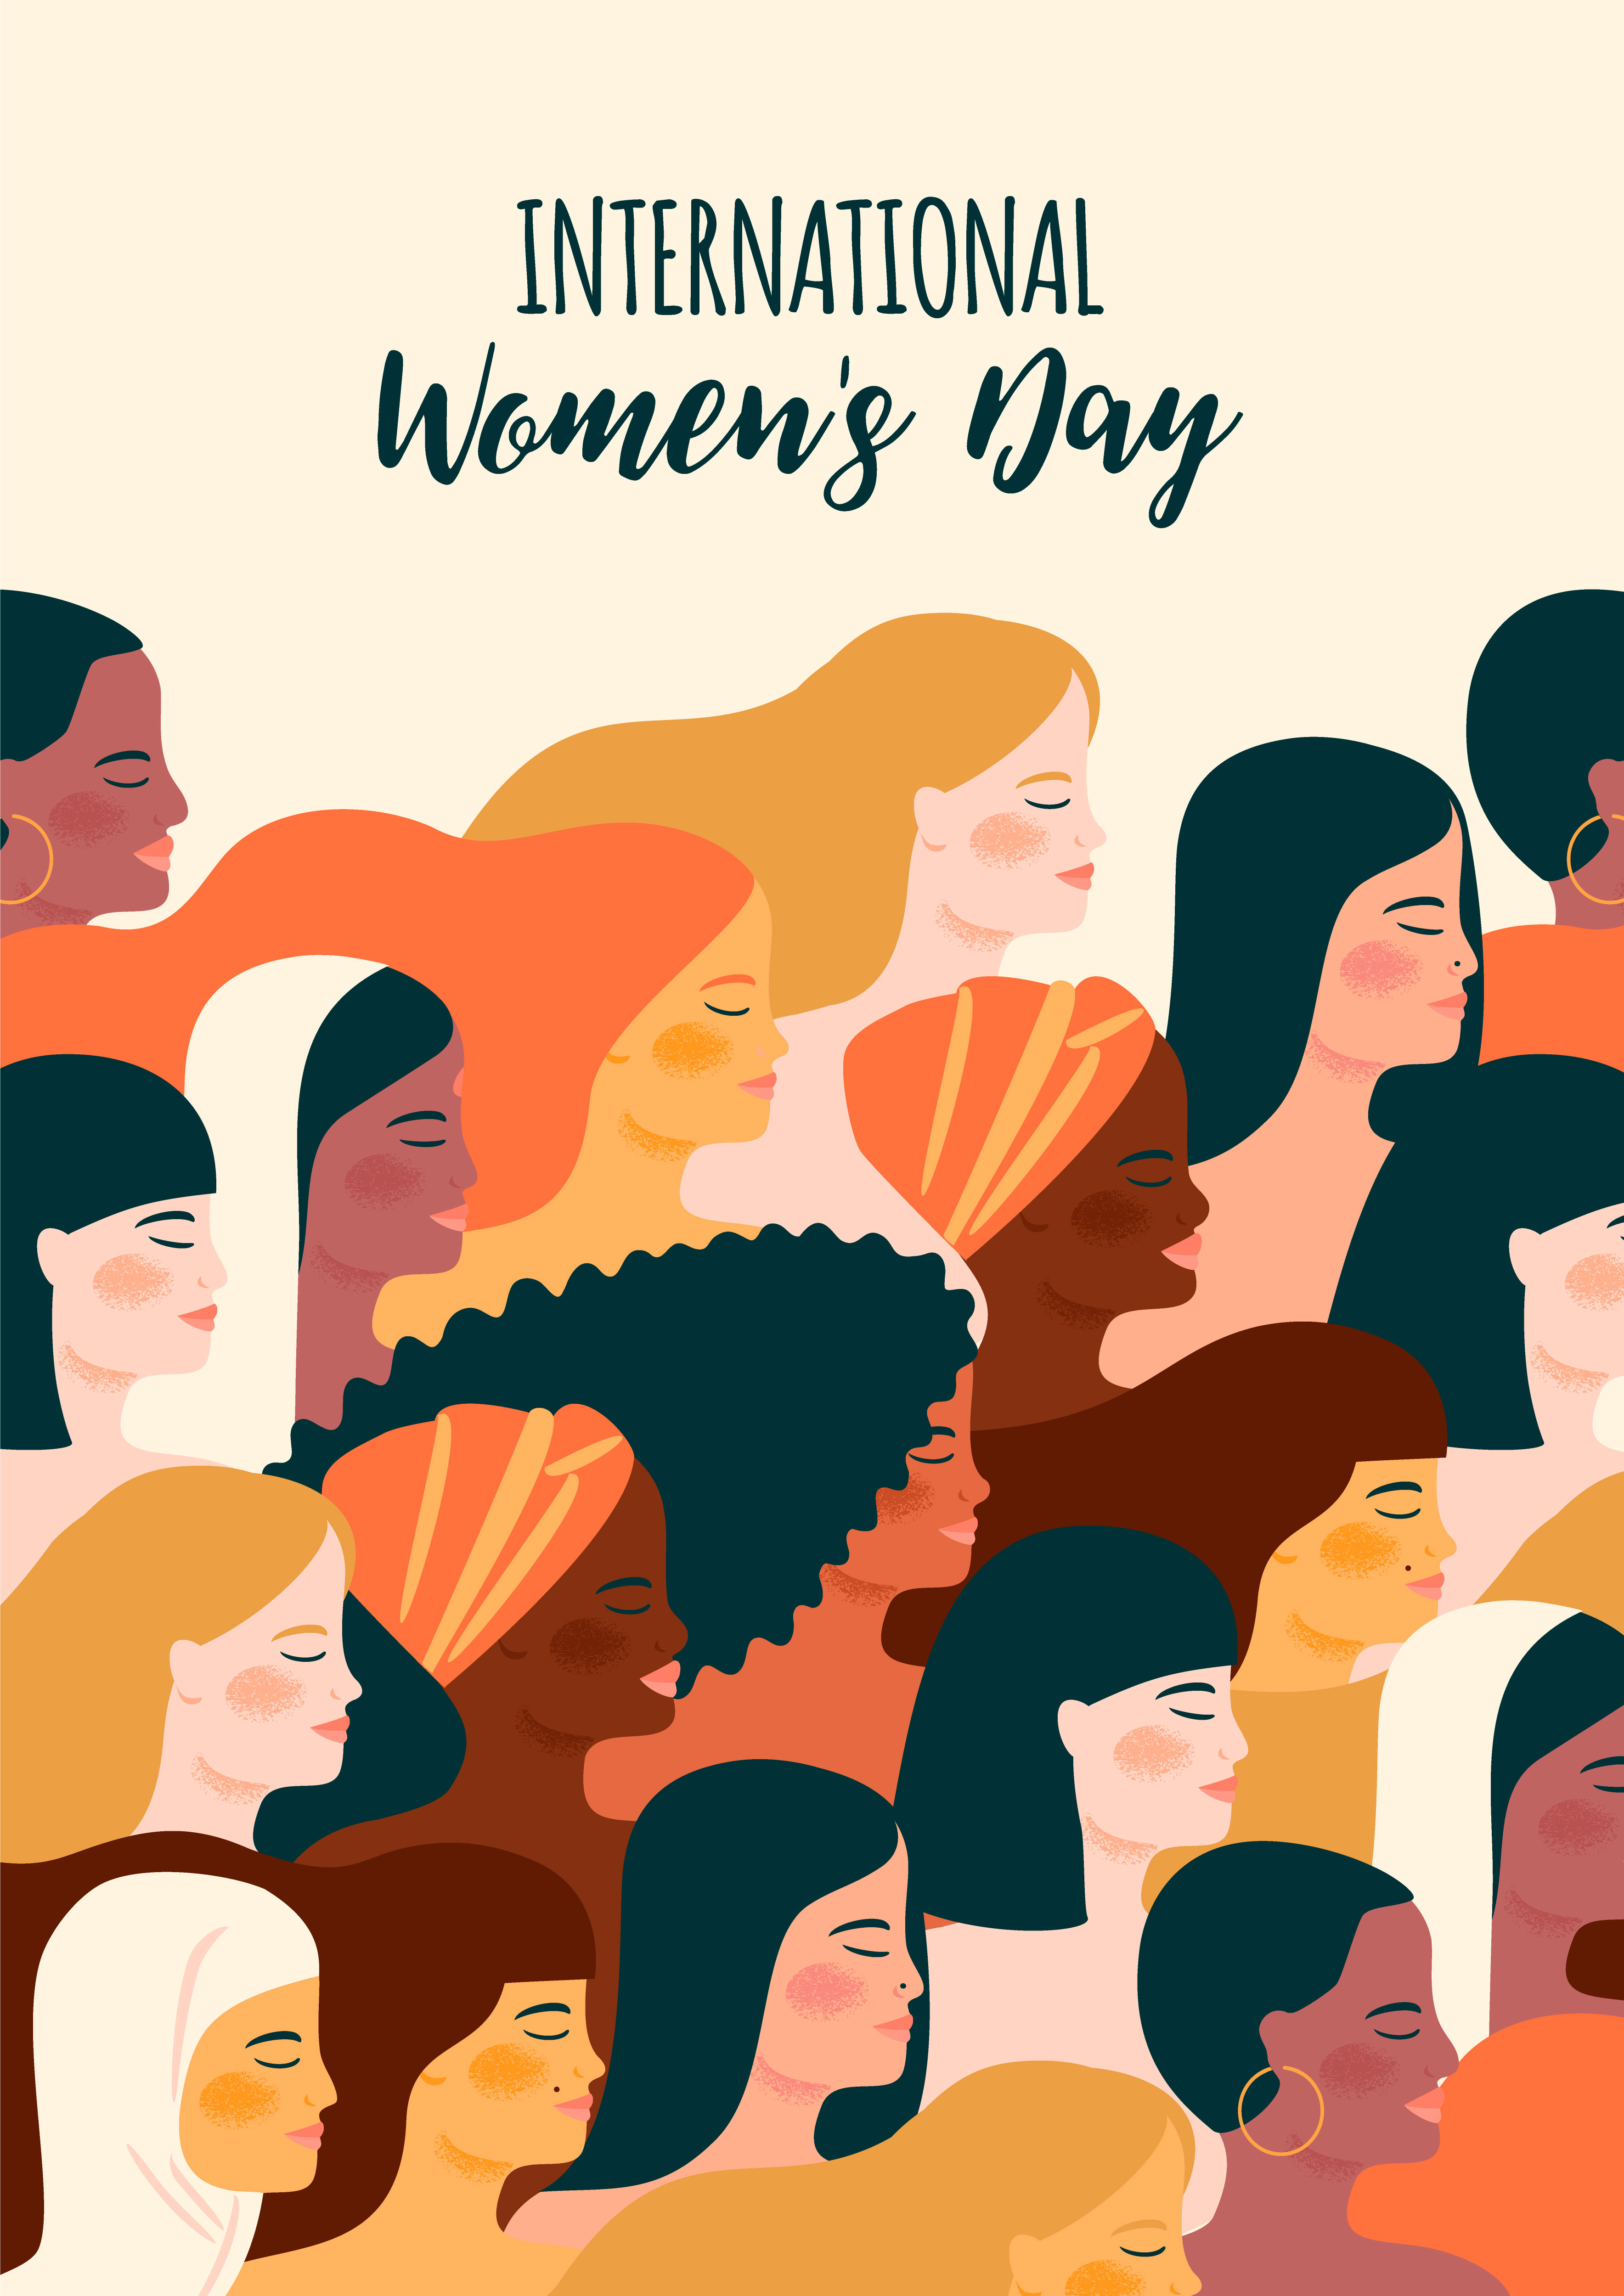 International Womens Day. Vector illustration with women different